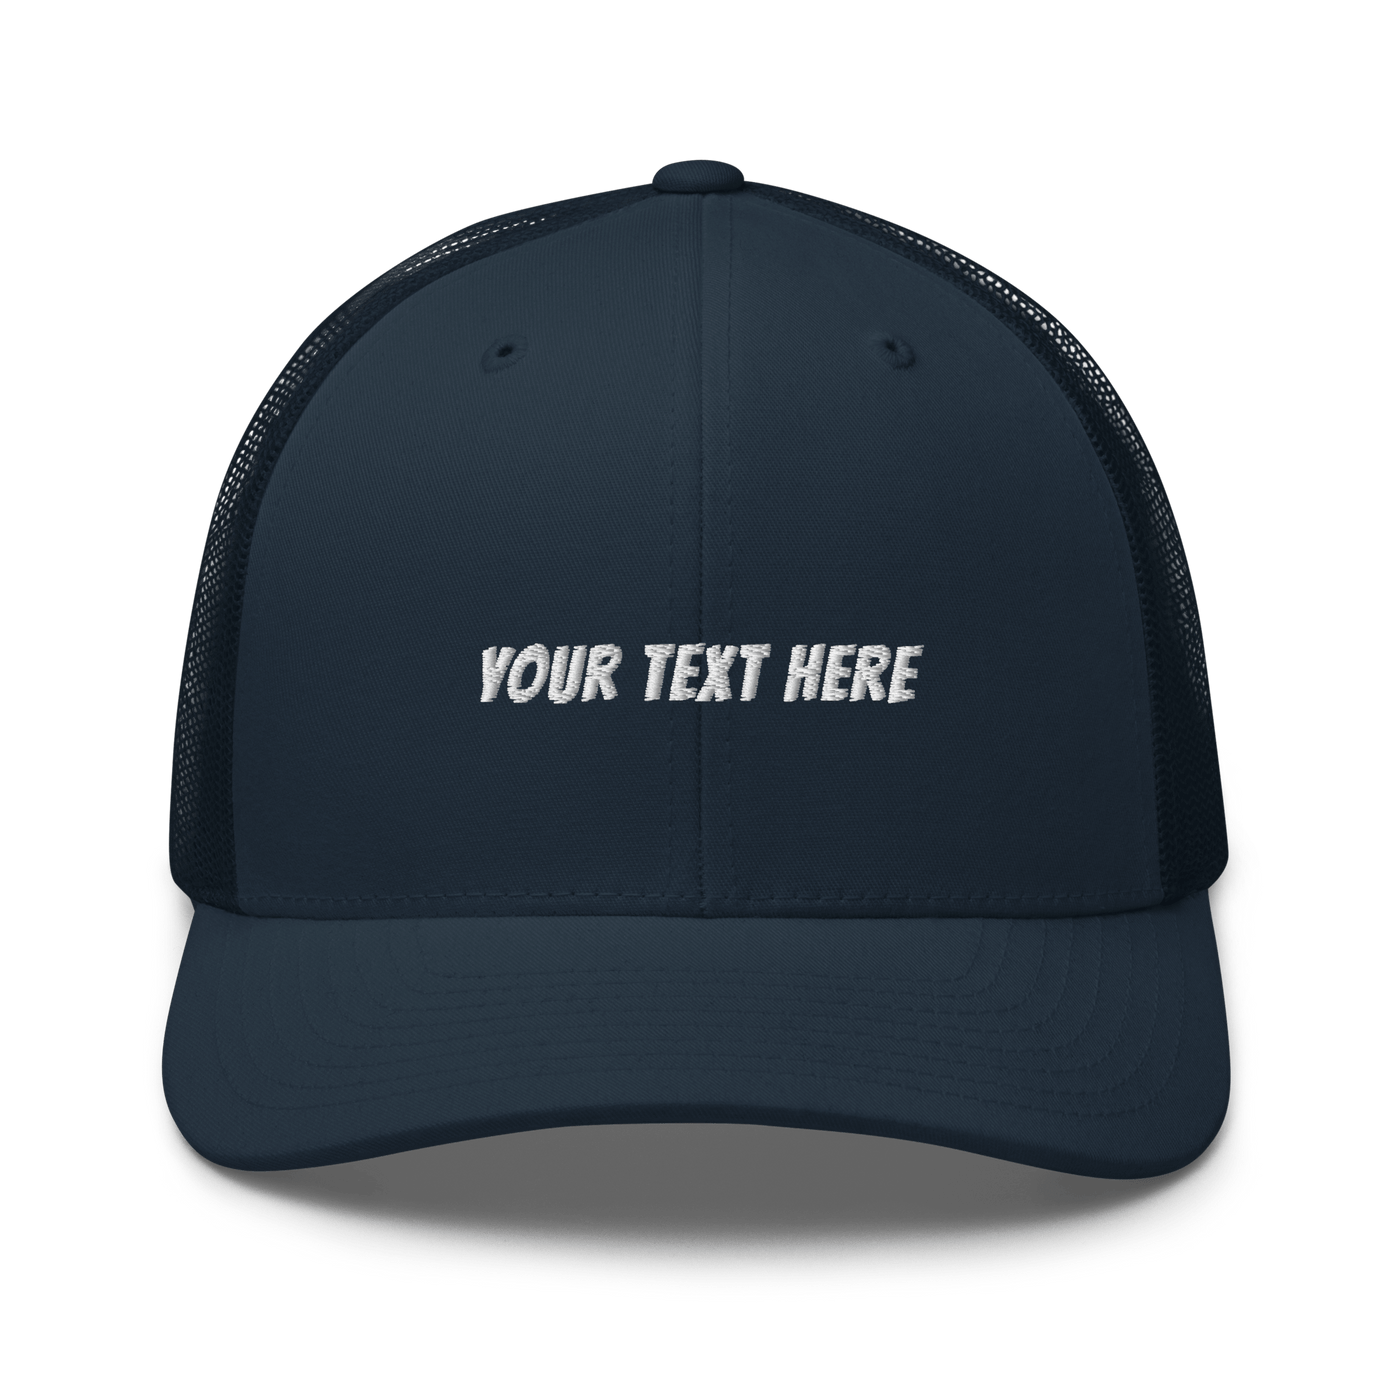 Customize Your Own Trucker Cap - Banger Font - Navy - - Just Another Cap Store